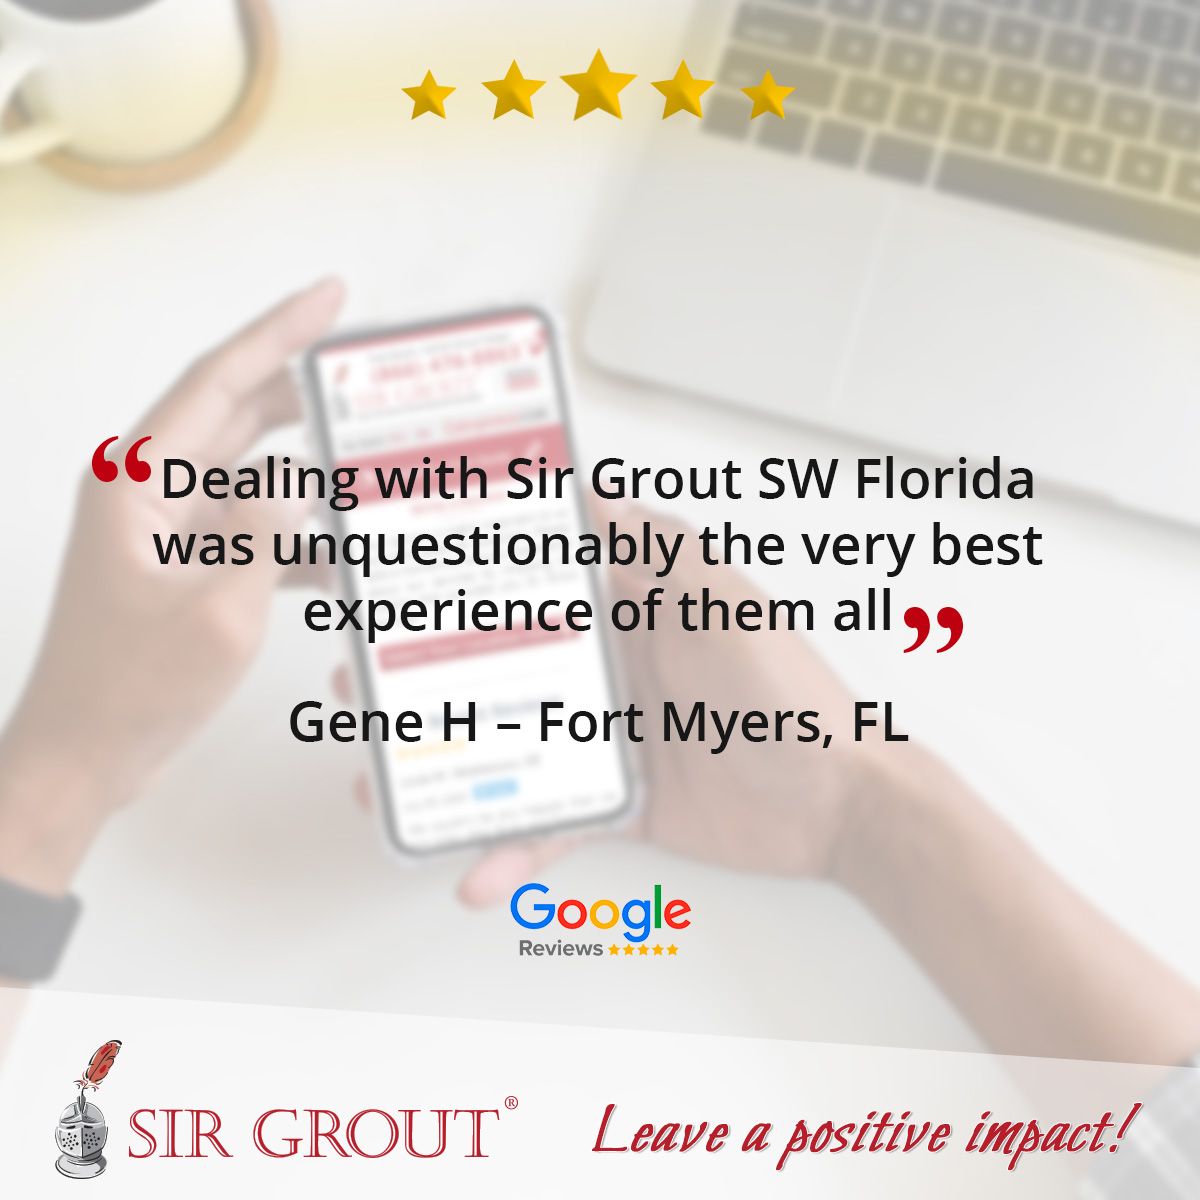 Dealing with Sir Grout SW Florida was unquestionably the very best experience of them all